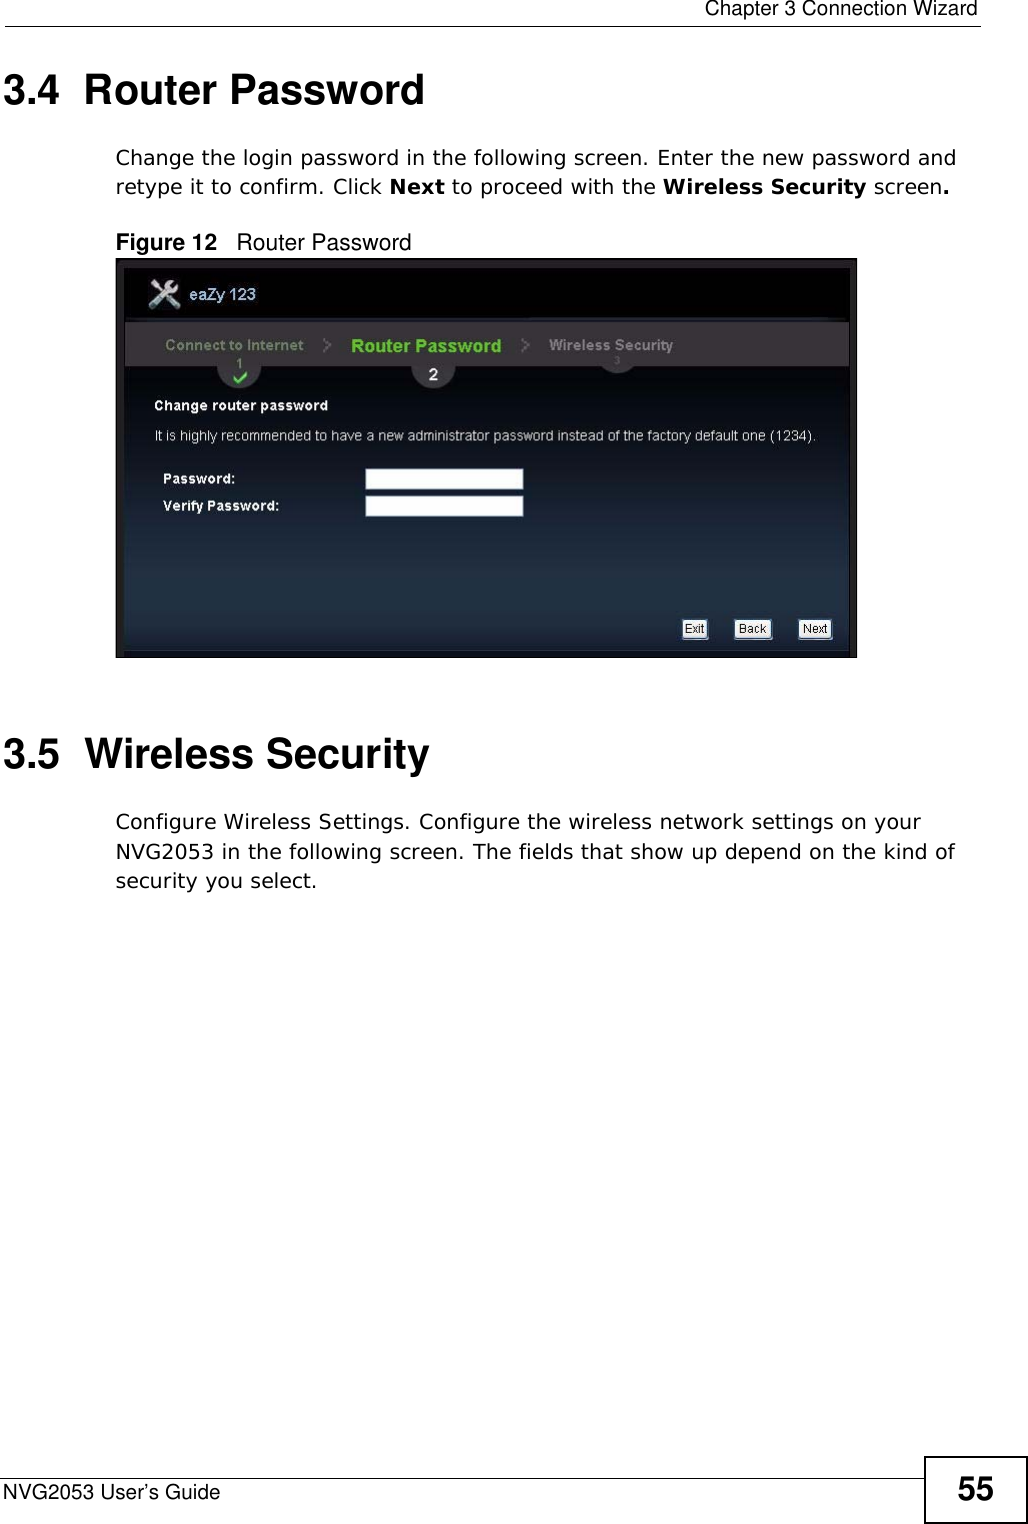  Chapter 3 Connection WizardNVG2053 User’s Guide 553.4  Router PasswordChange the login password in the following screen. Enter the new password and retype it to confirm. Click Next to proceed with the Wireless Security screen.Figure 12   Router Password  3.5  Wireless SecurityConfigure Wireless Settings. Configure the wireless network settings on your NVG2053 in the following screen. The fields that show up depend on the kind of security you select.